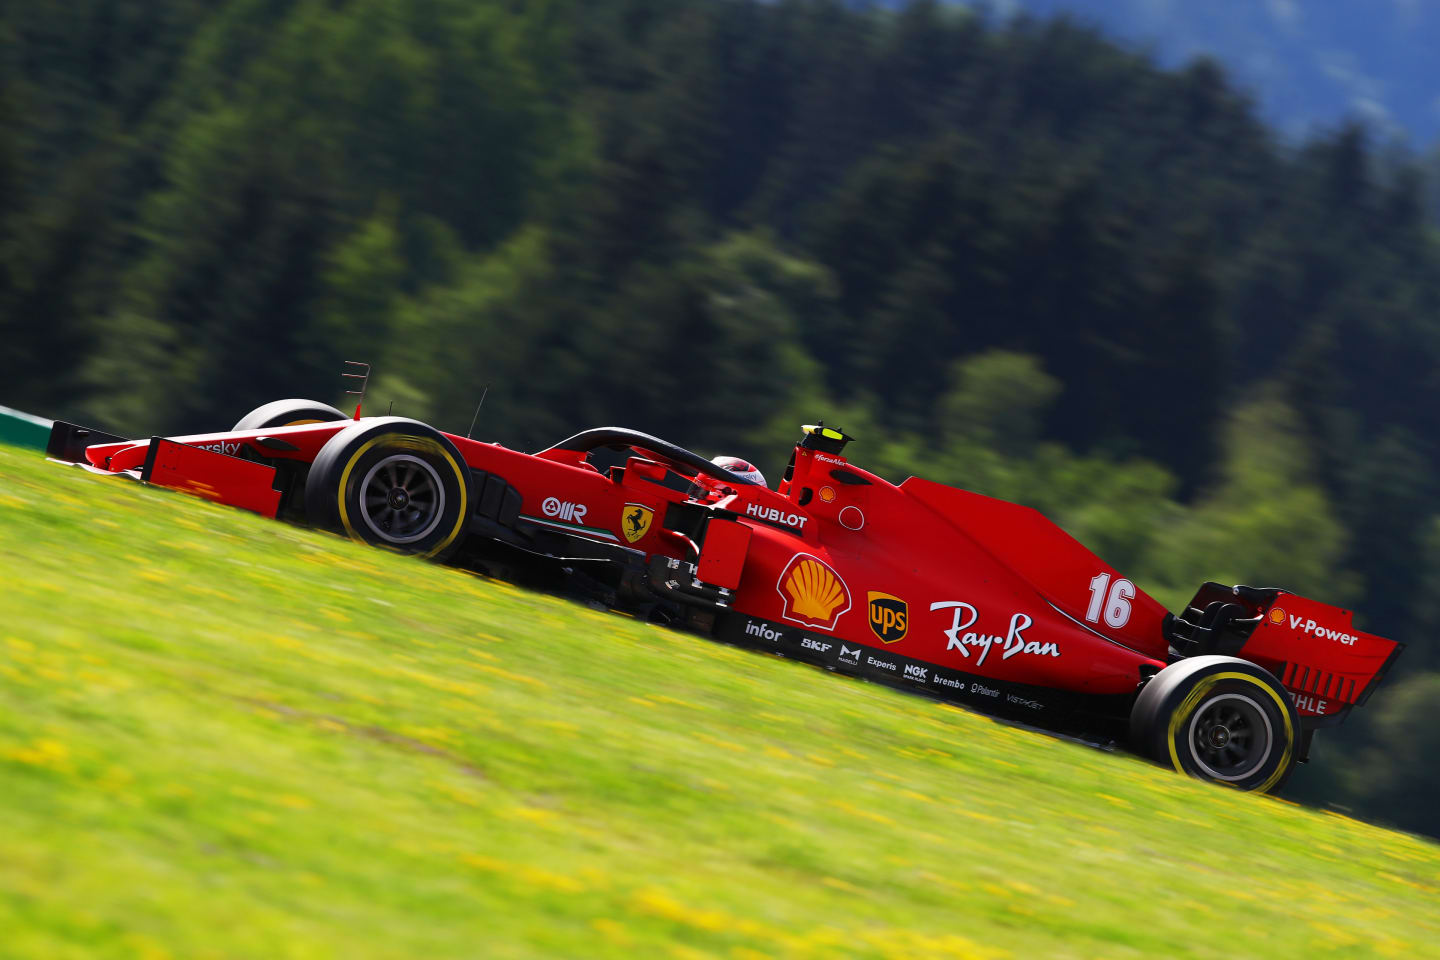 SPIELBERG, AUSTRIA - JULY 10: Charles Leclerc of Monaco driving the (16) Scuderia Ferrari SF1000 on track during practice for the F1 Grand Prix of Styria at Red Bull Ring on July 10, 2020 in Spielberg, Austria. (Photo by Mark Thompson/Getty Images)